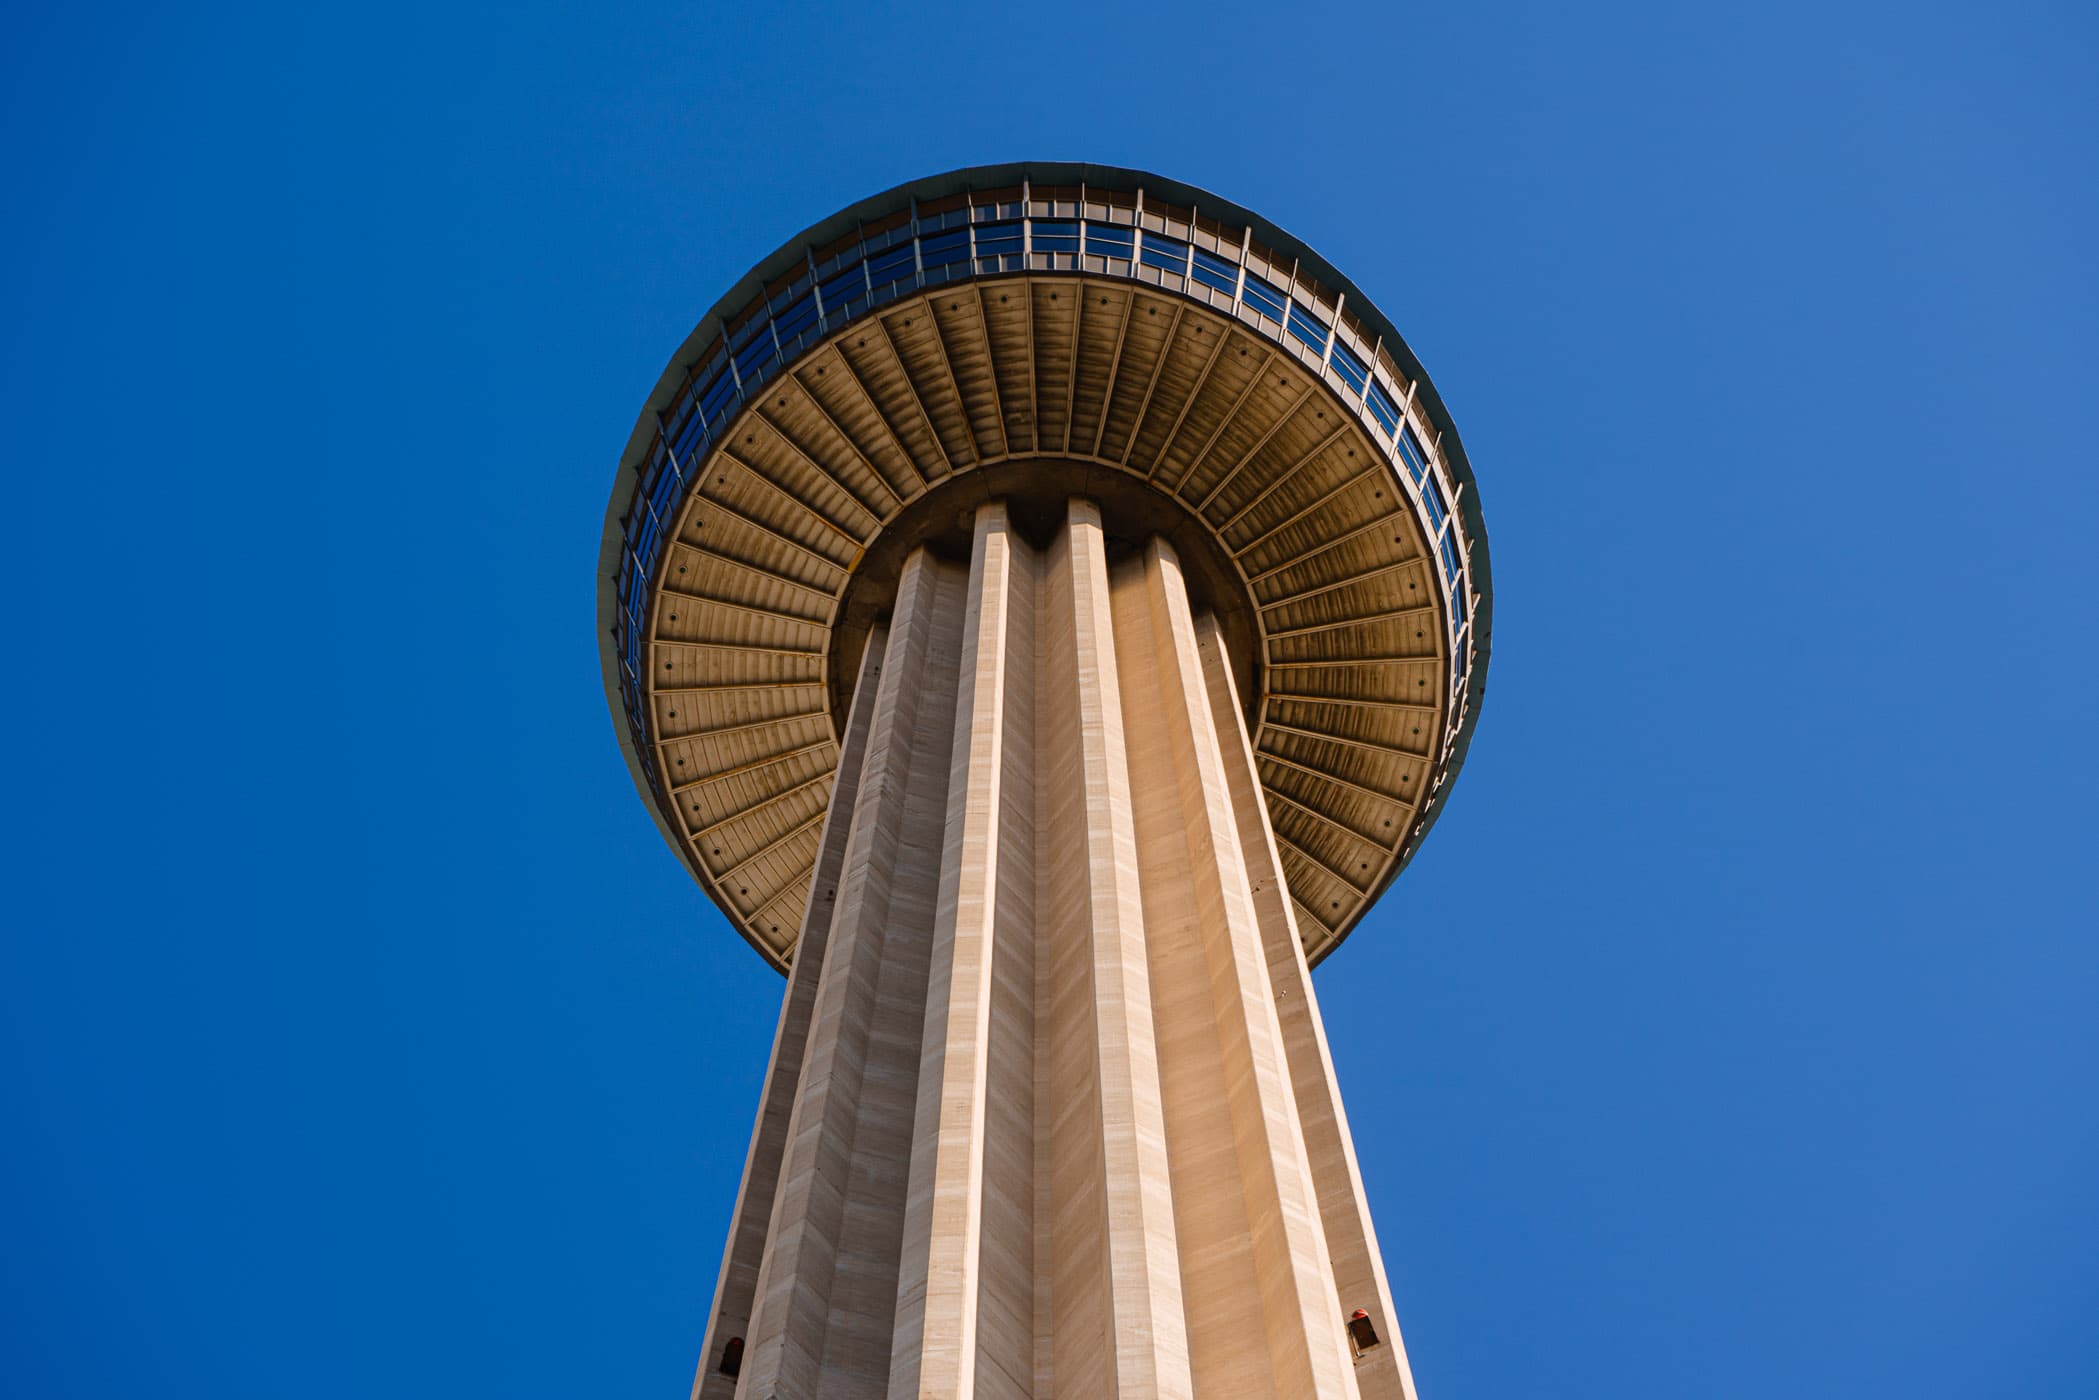 The 750-foot-tall Tower of the Americas rises into the clear blue sky over San Antonio, Texas.